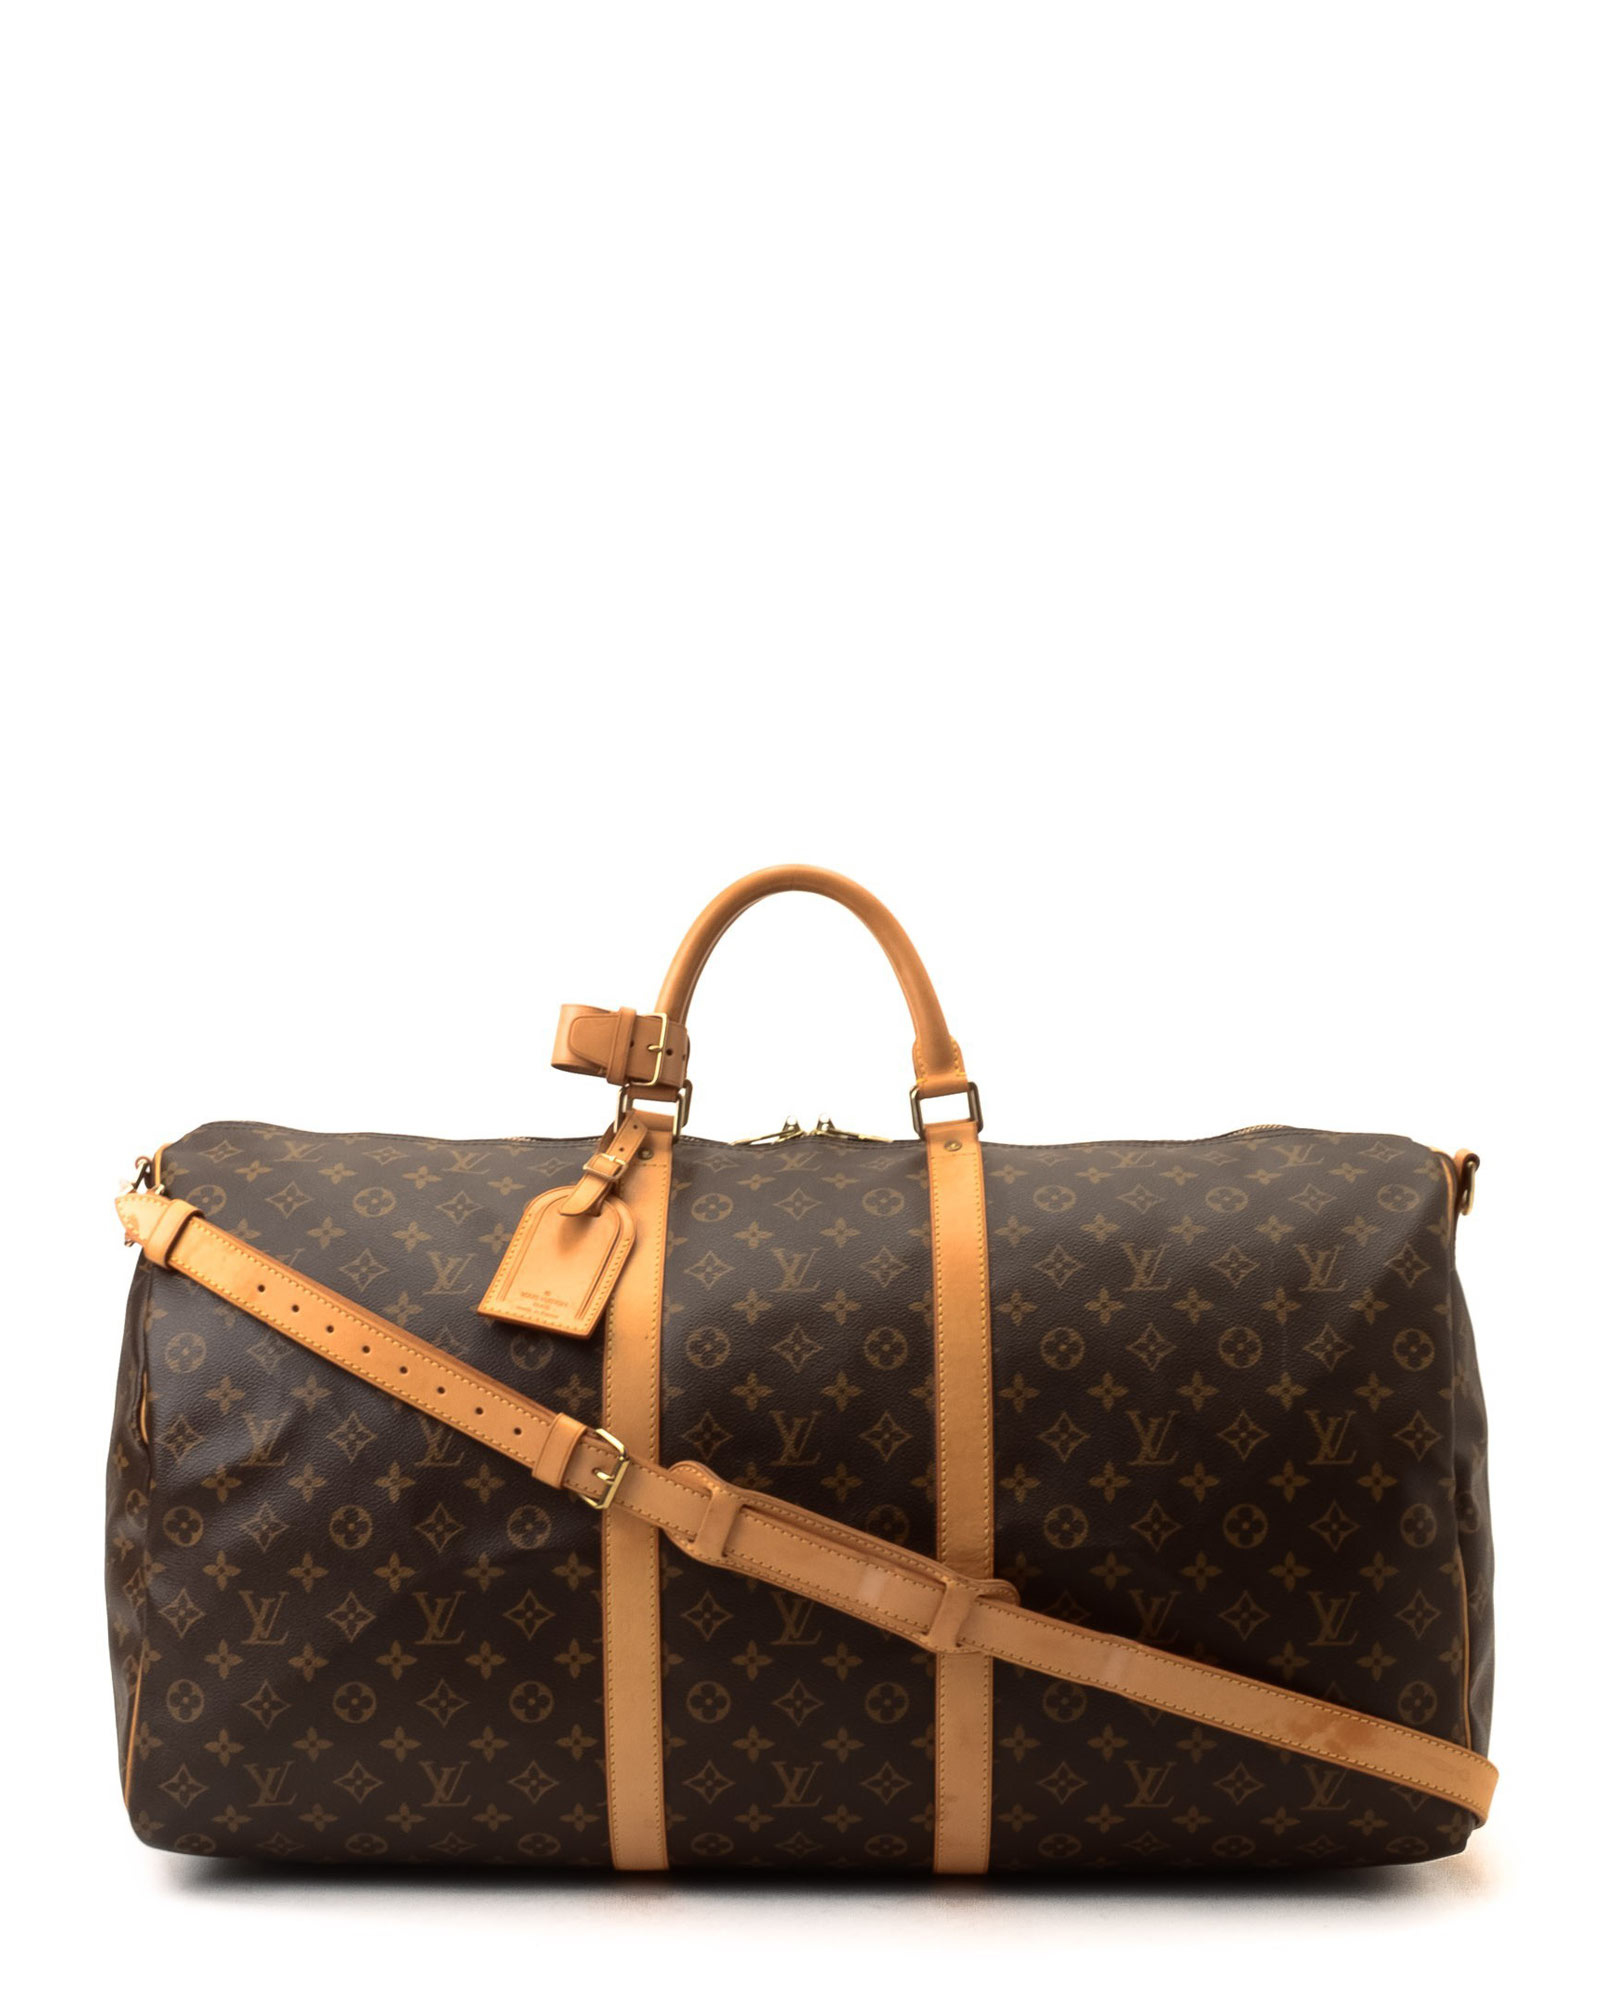 Big Brown Louis Vuitton Bag | Confederated Tribes of the Umatilla Indian Reservation